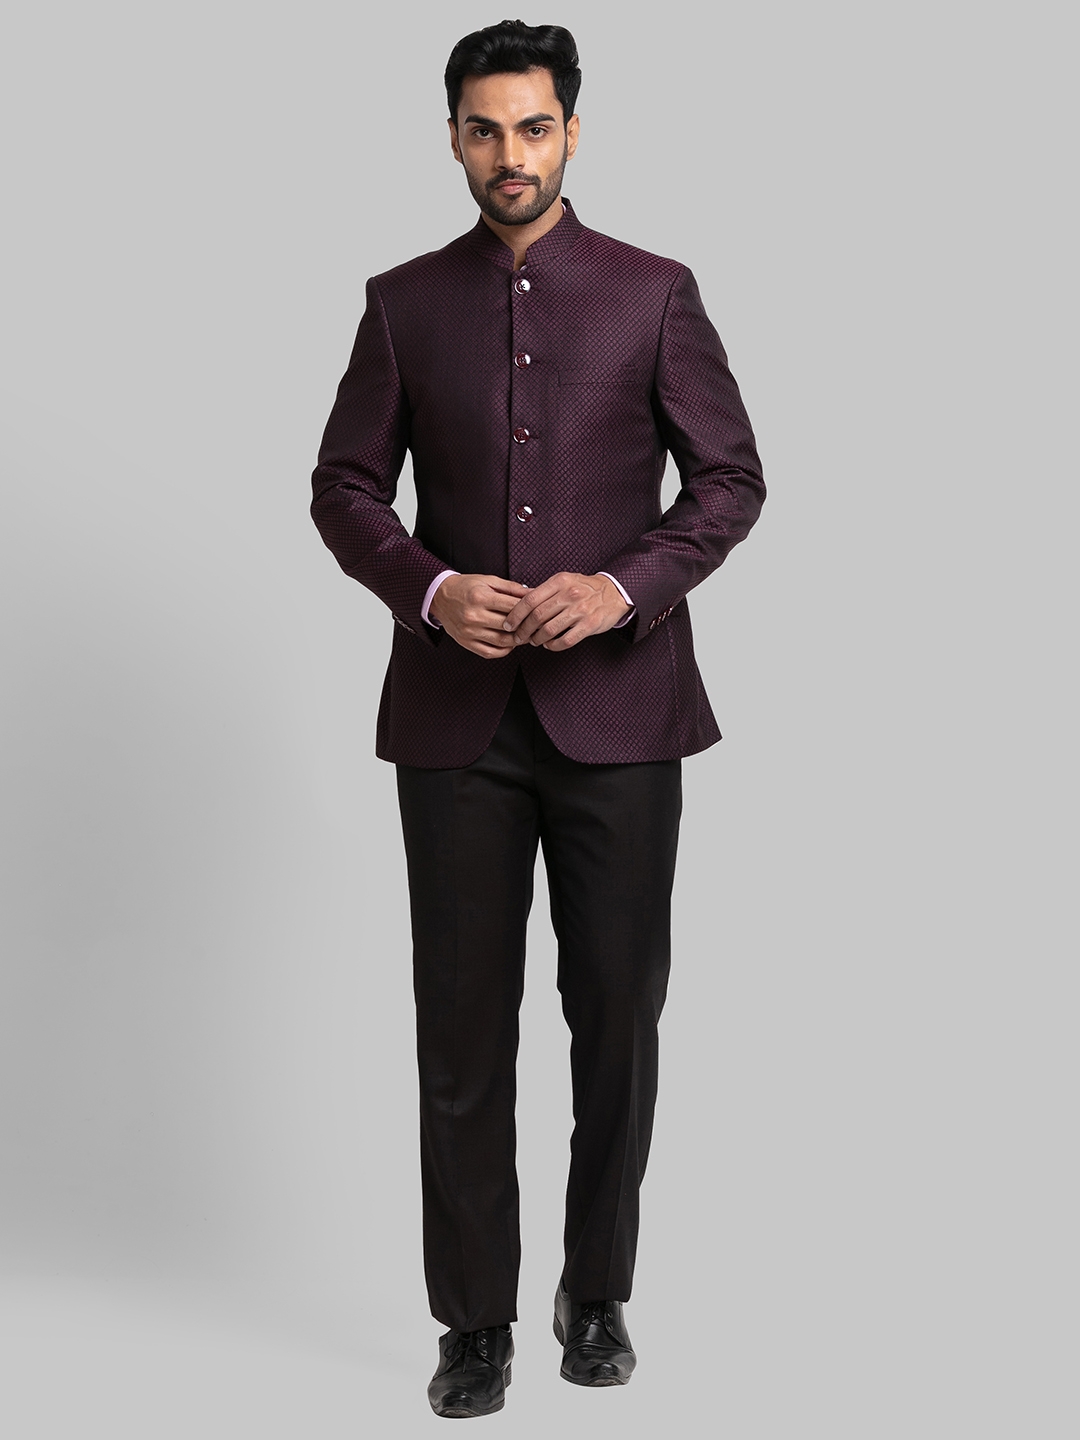 Buy Raymond Maroon Regular Polyester Blend Suit at Amazon.in